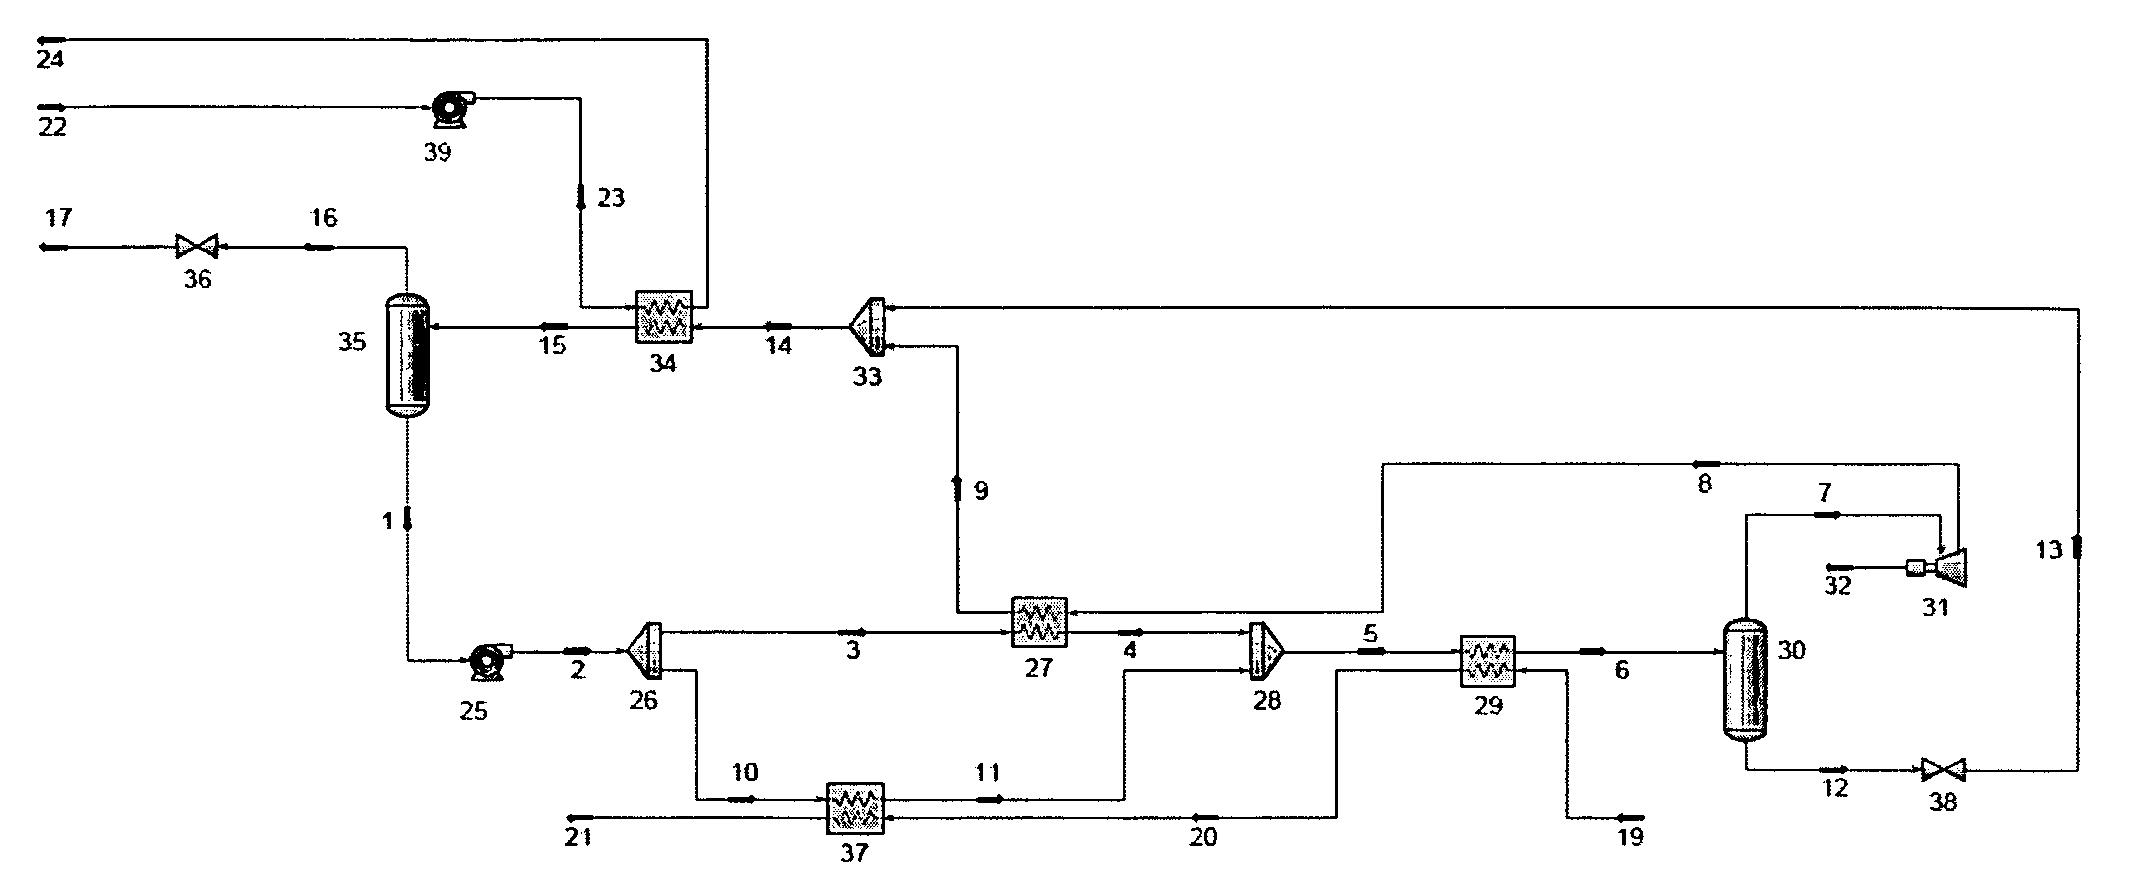 Power recovery and energy conversion systems and methods of using same